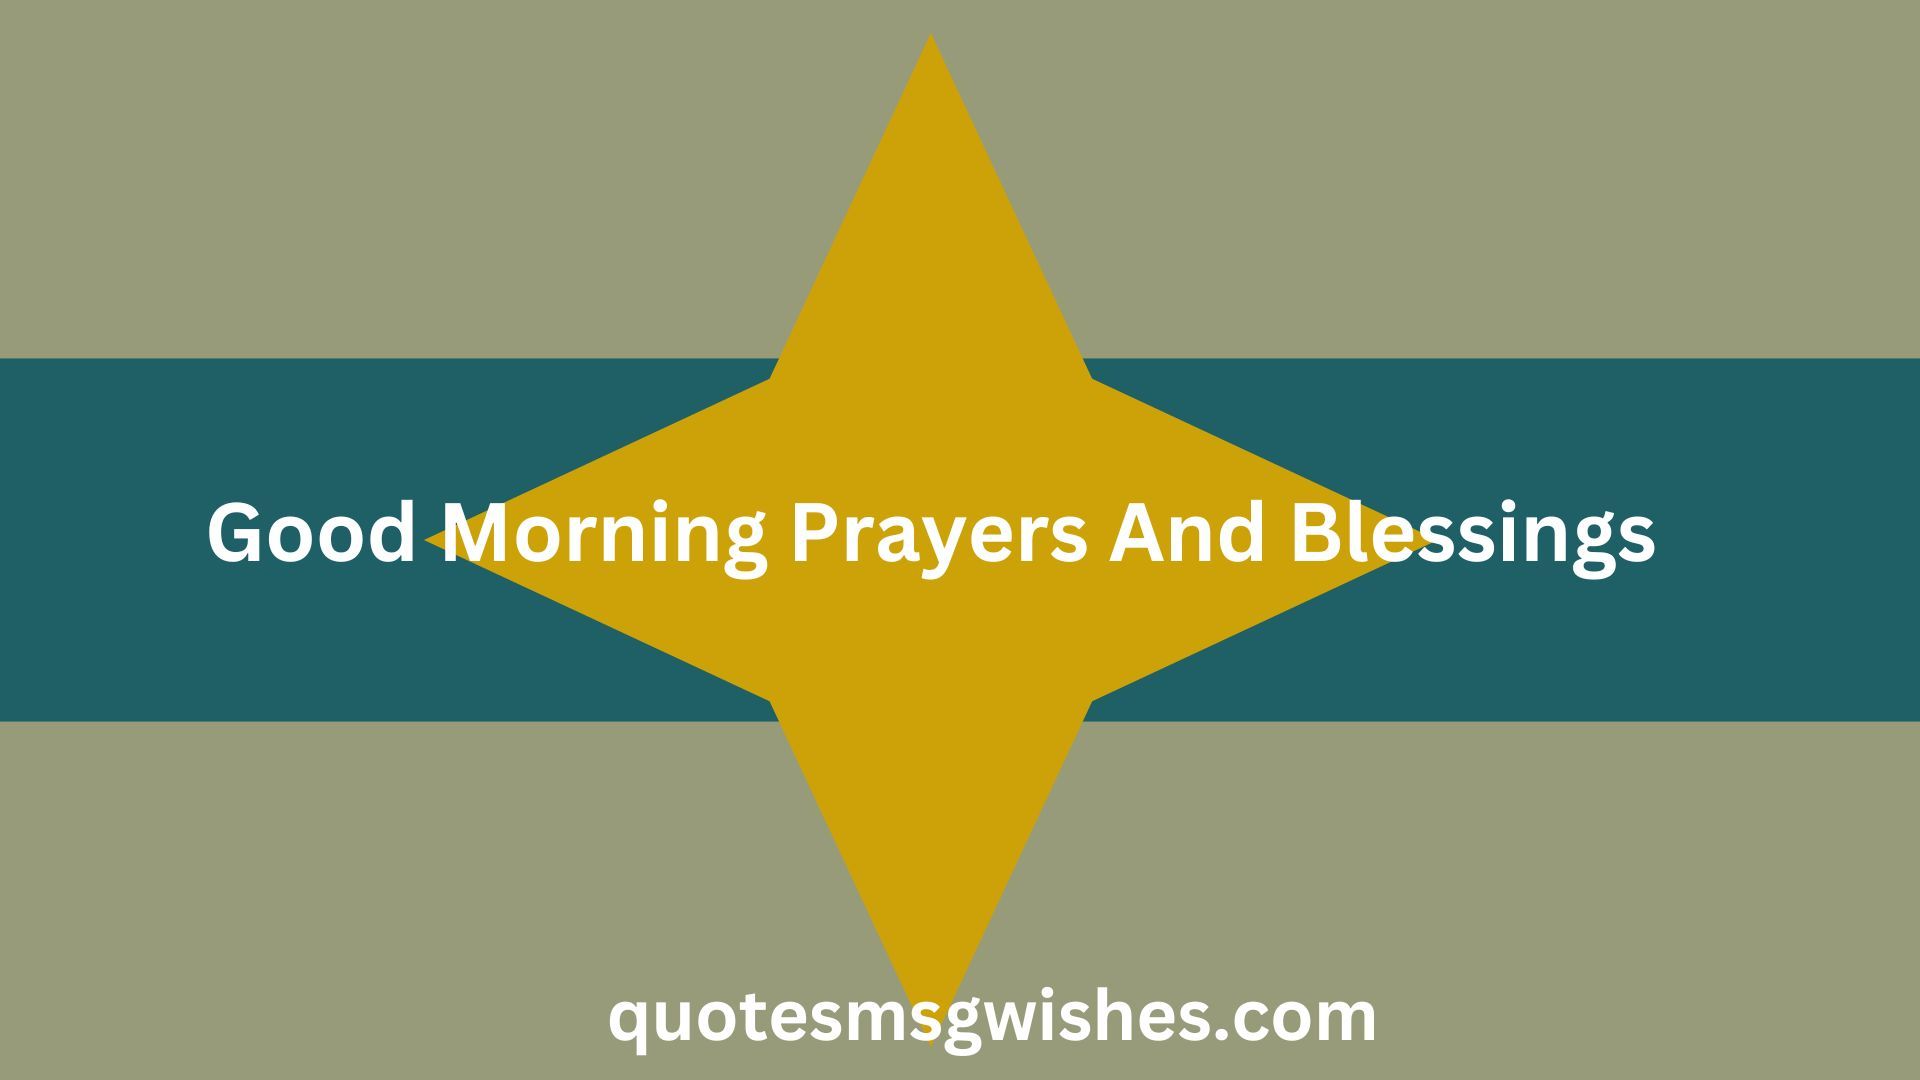 Good Morning Prayers And Blessings